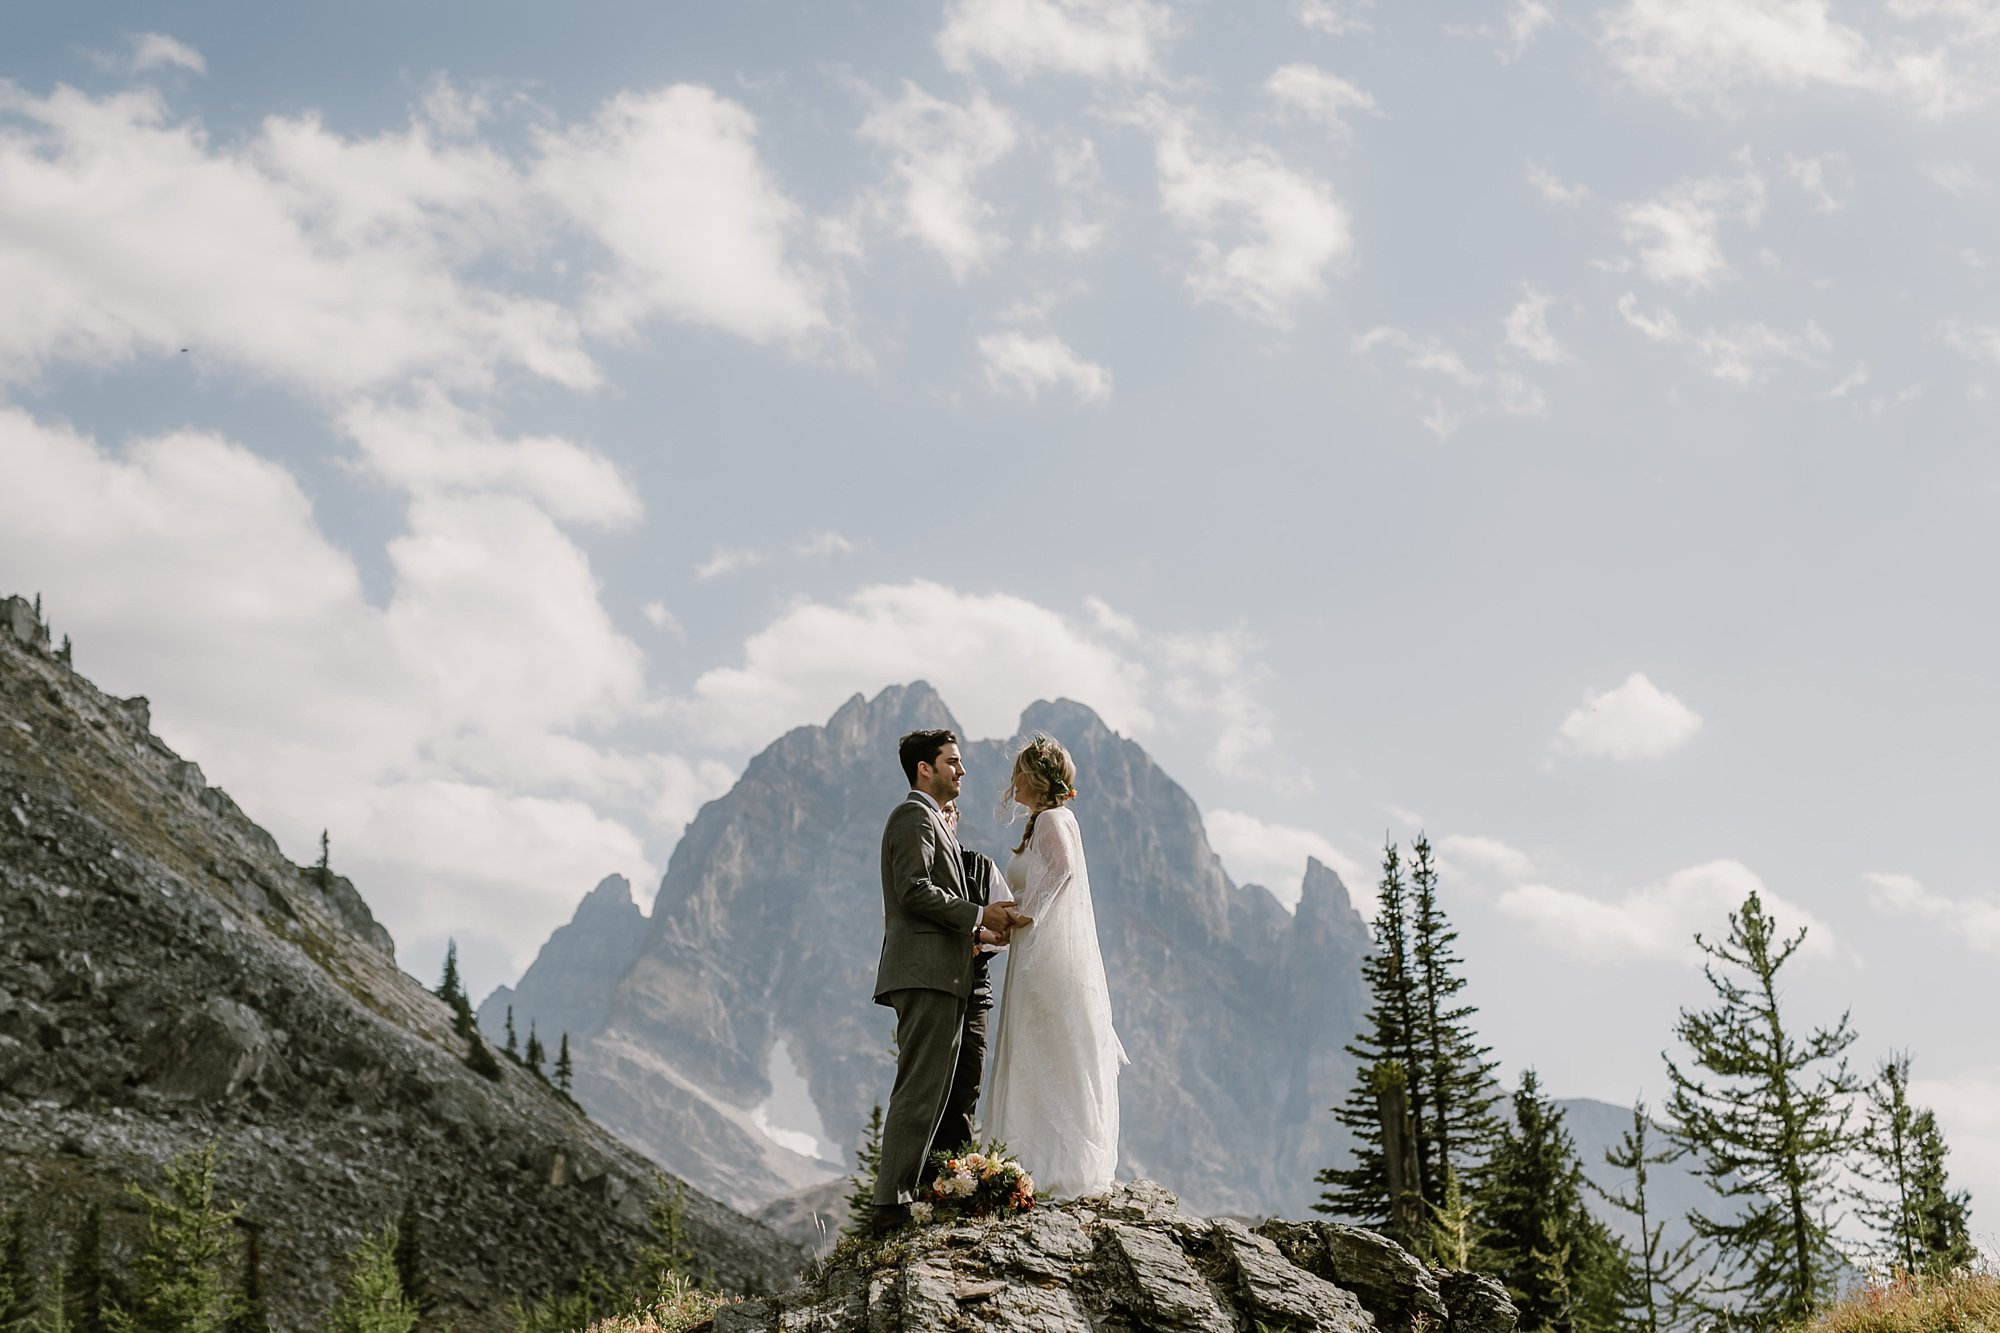 A wedding ceremony in Banff National Park